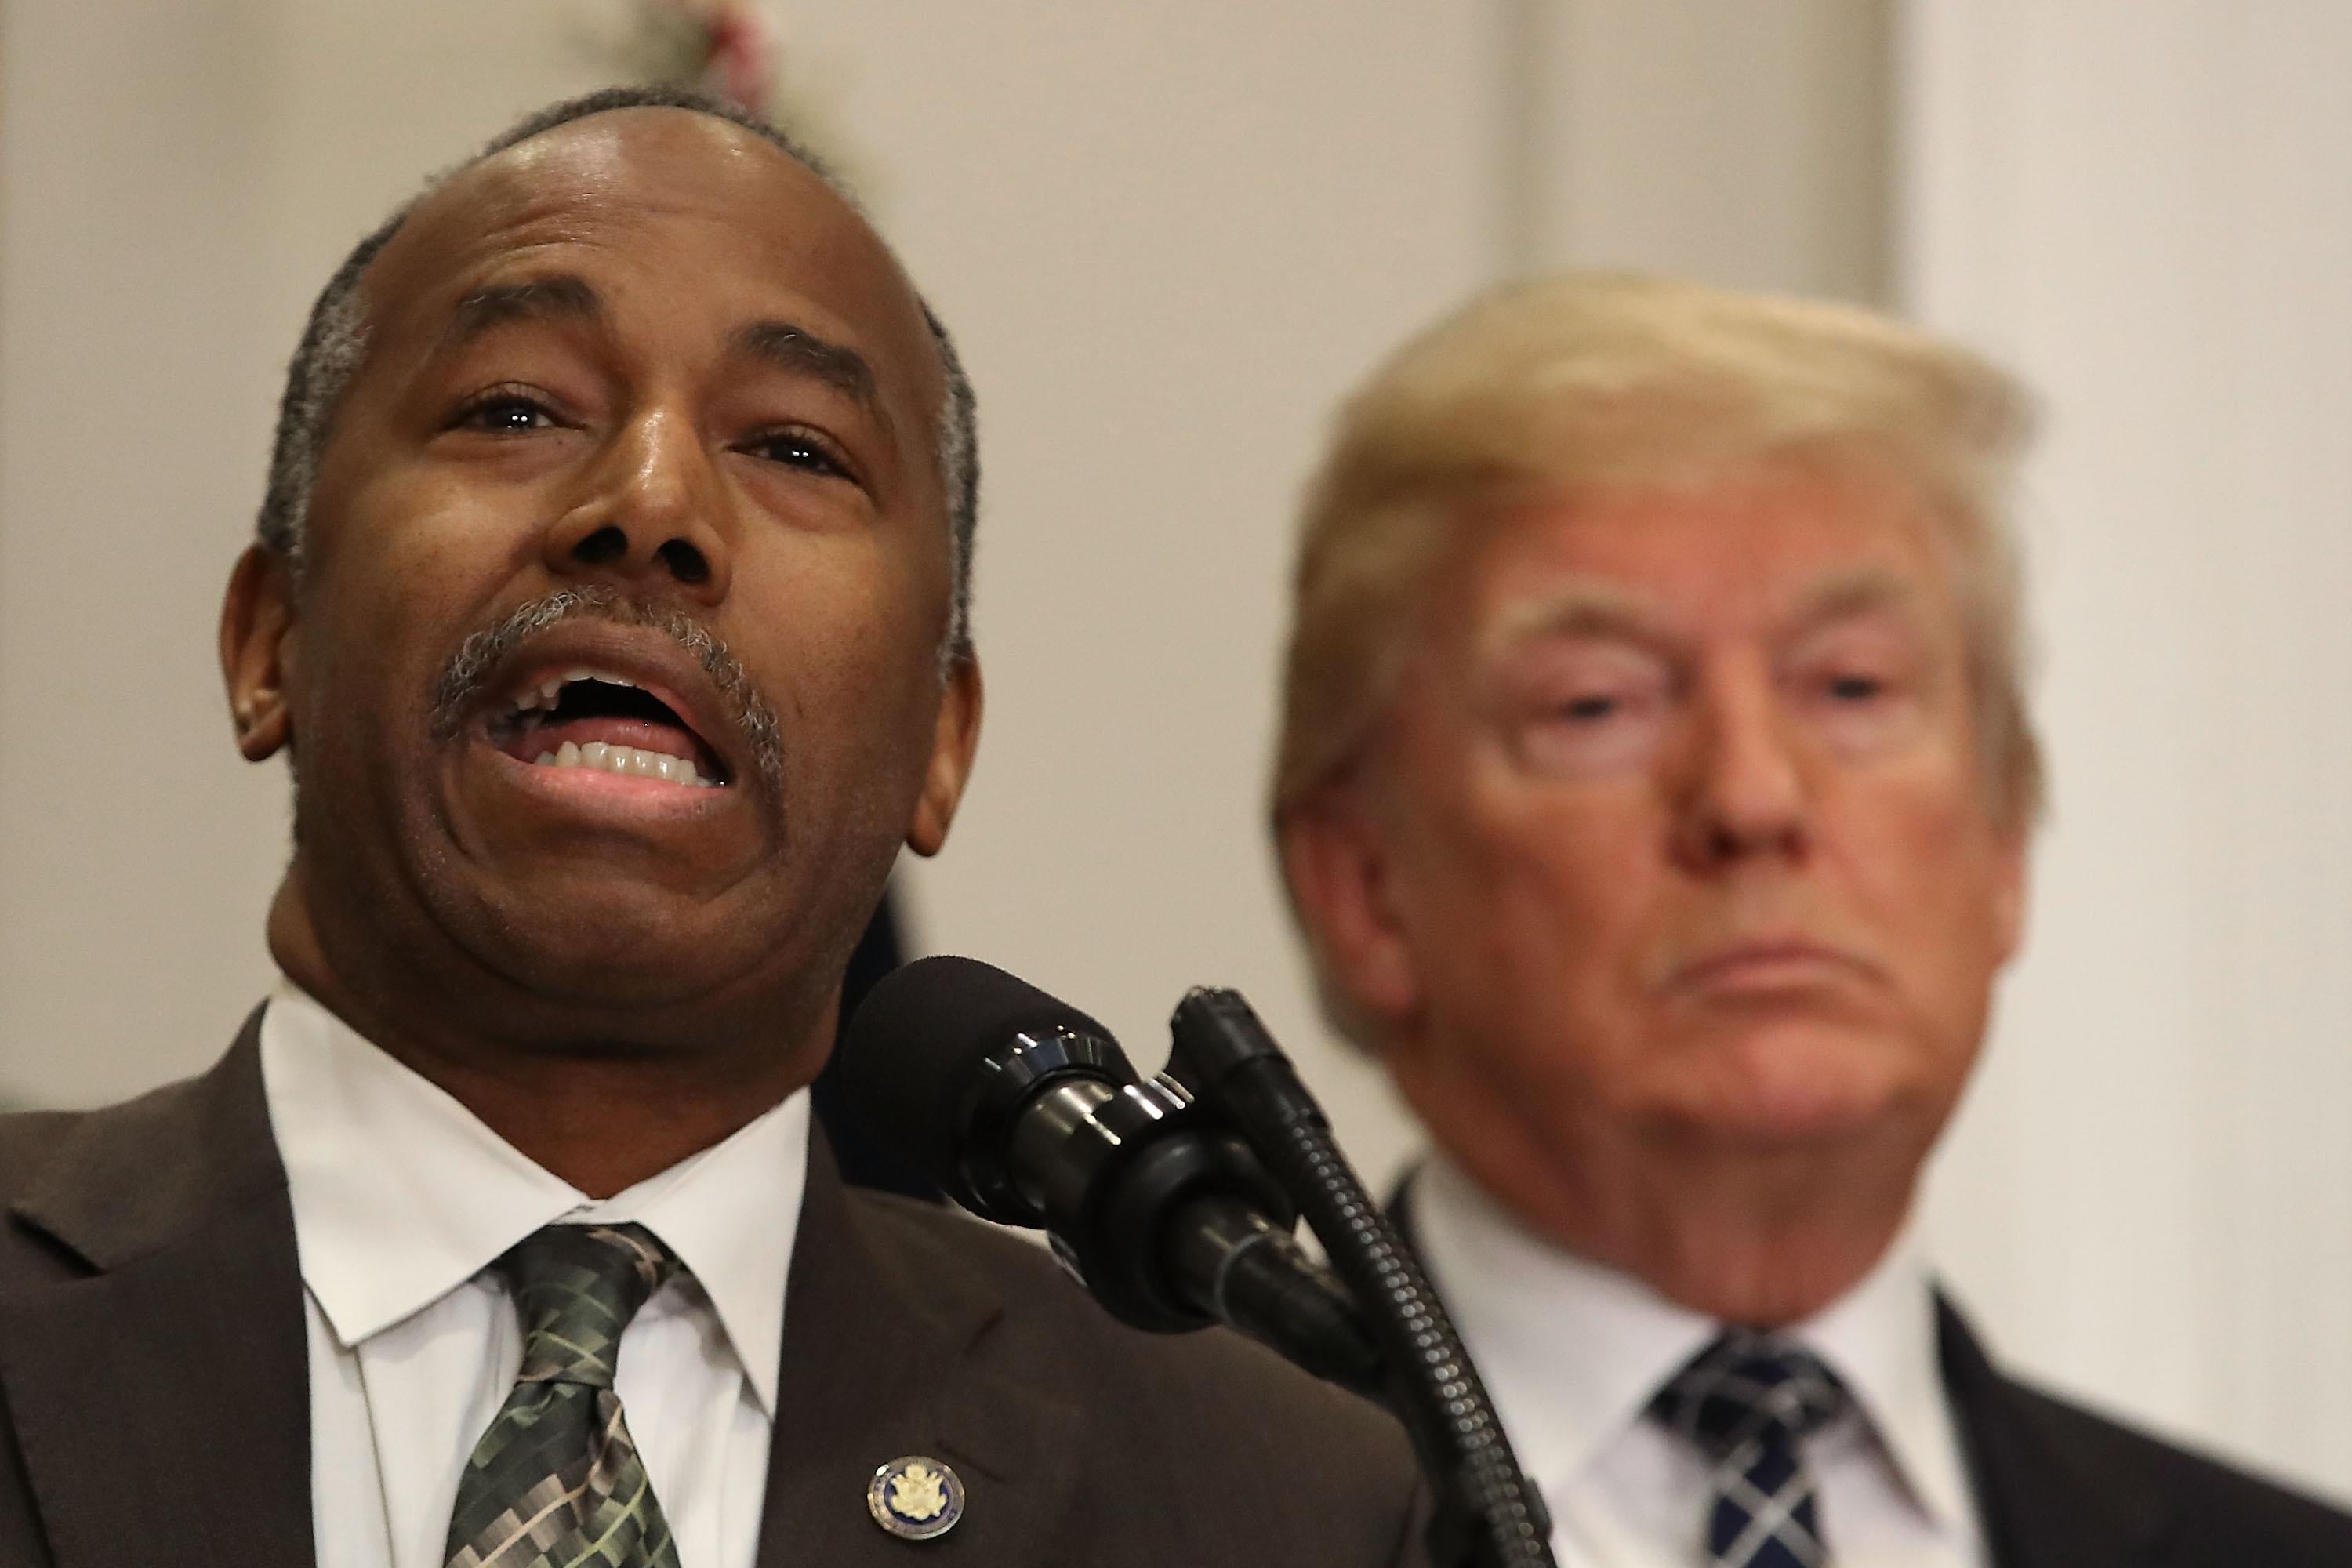 HUD Secretary Ben Carson, with Donald Trump in the background.